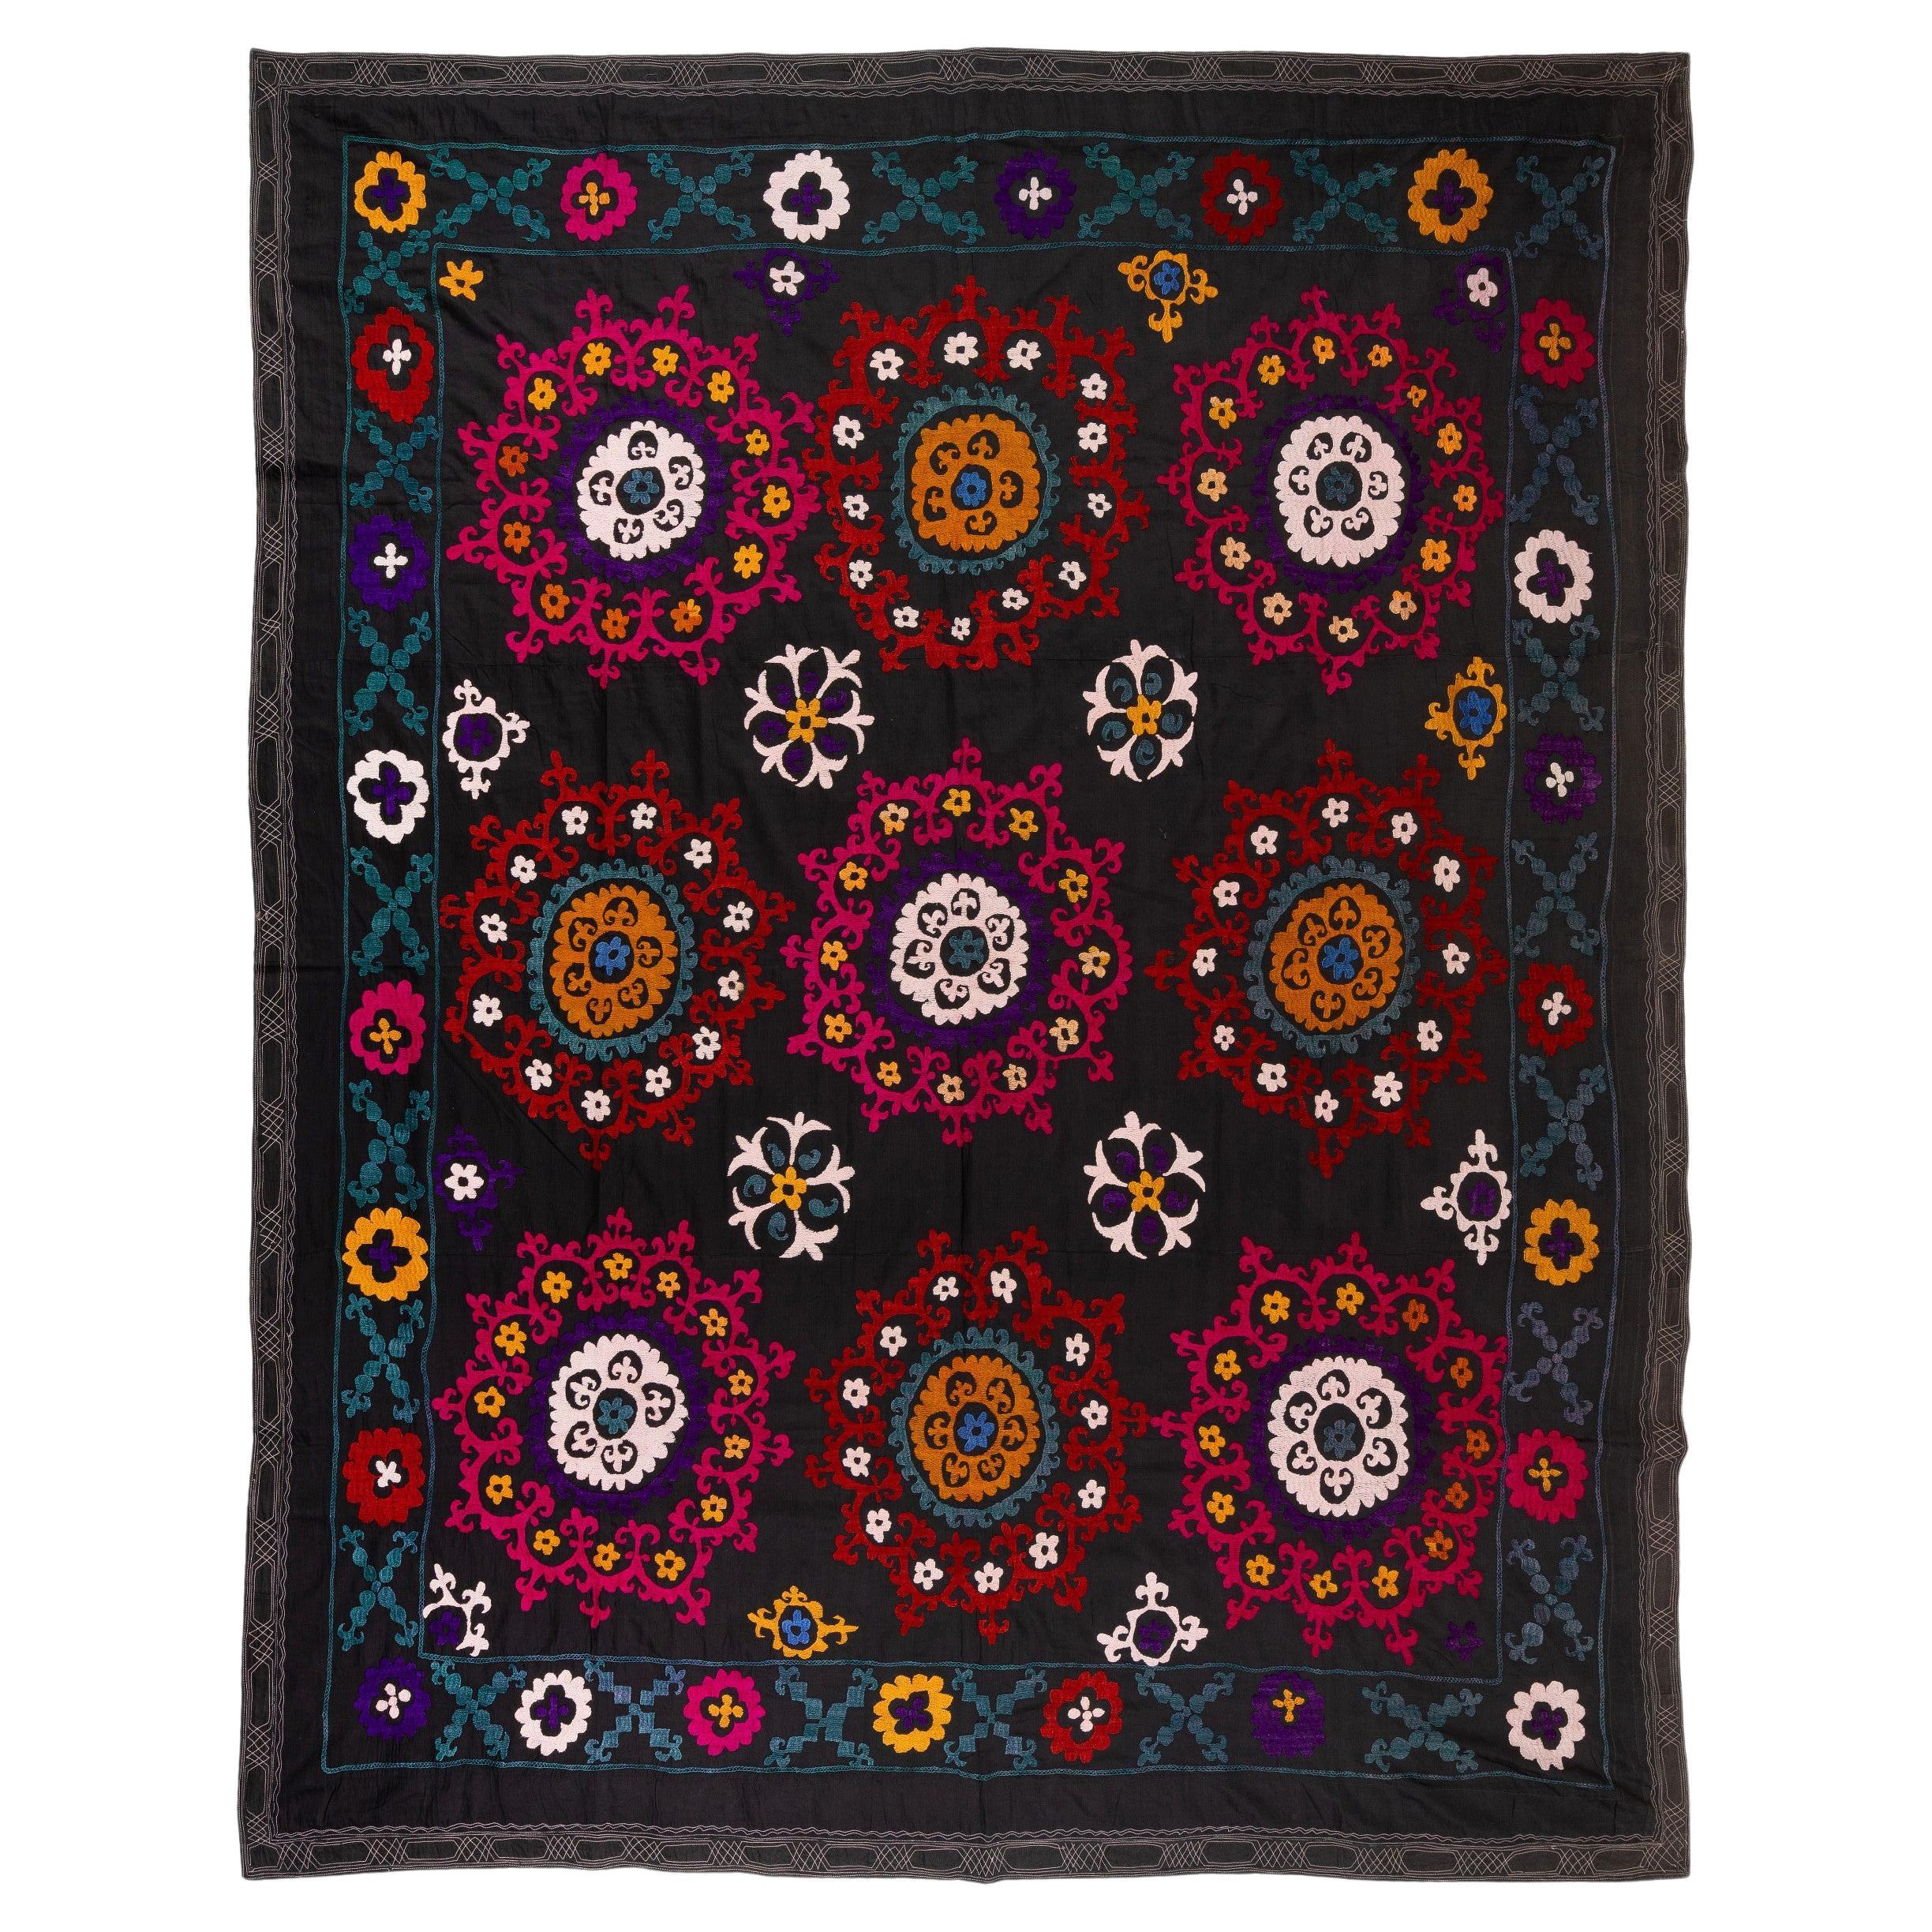 6.4x7.8 Ft Silk Embroidery Bed Cover. Black Wall Hanging. Needlework Tablecloth For Sale